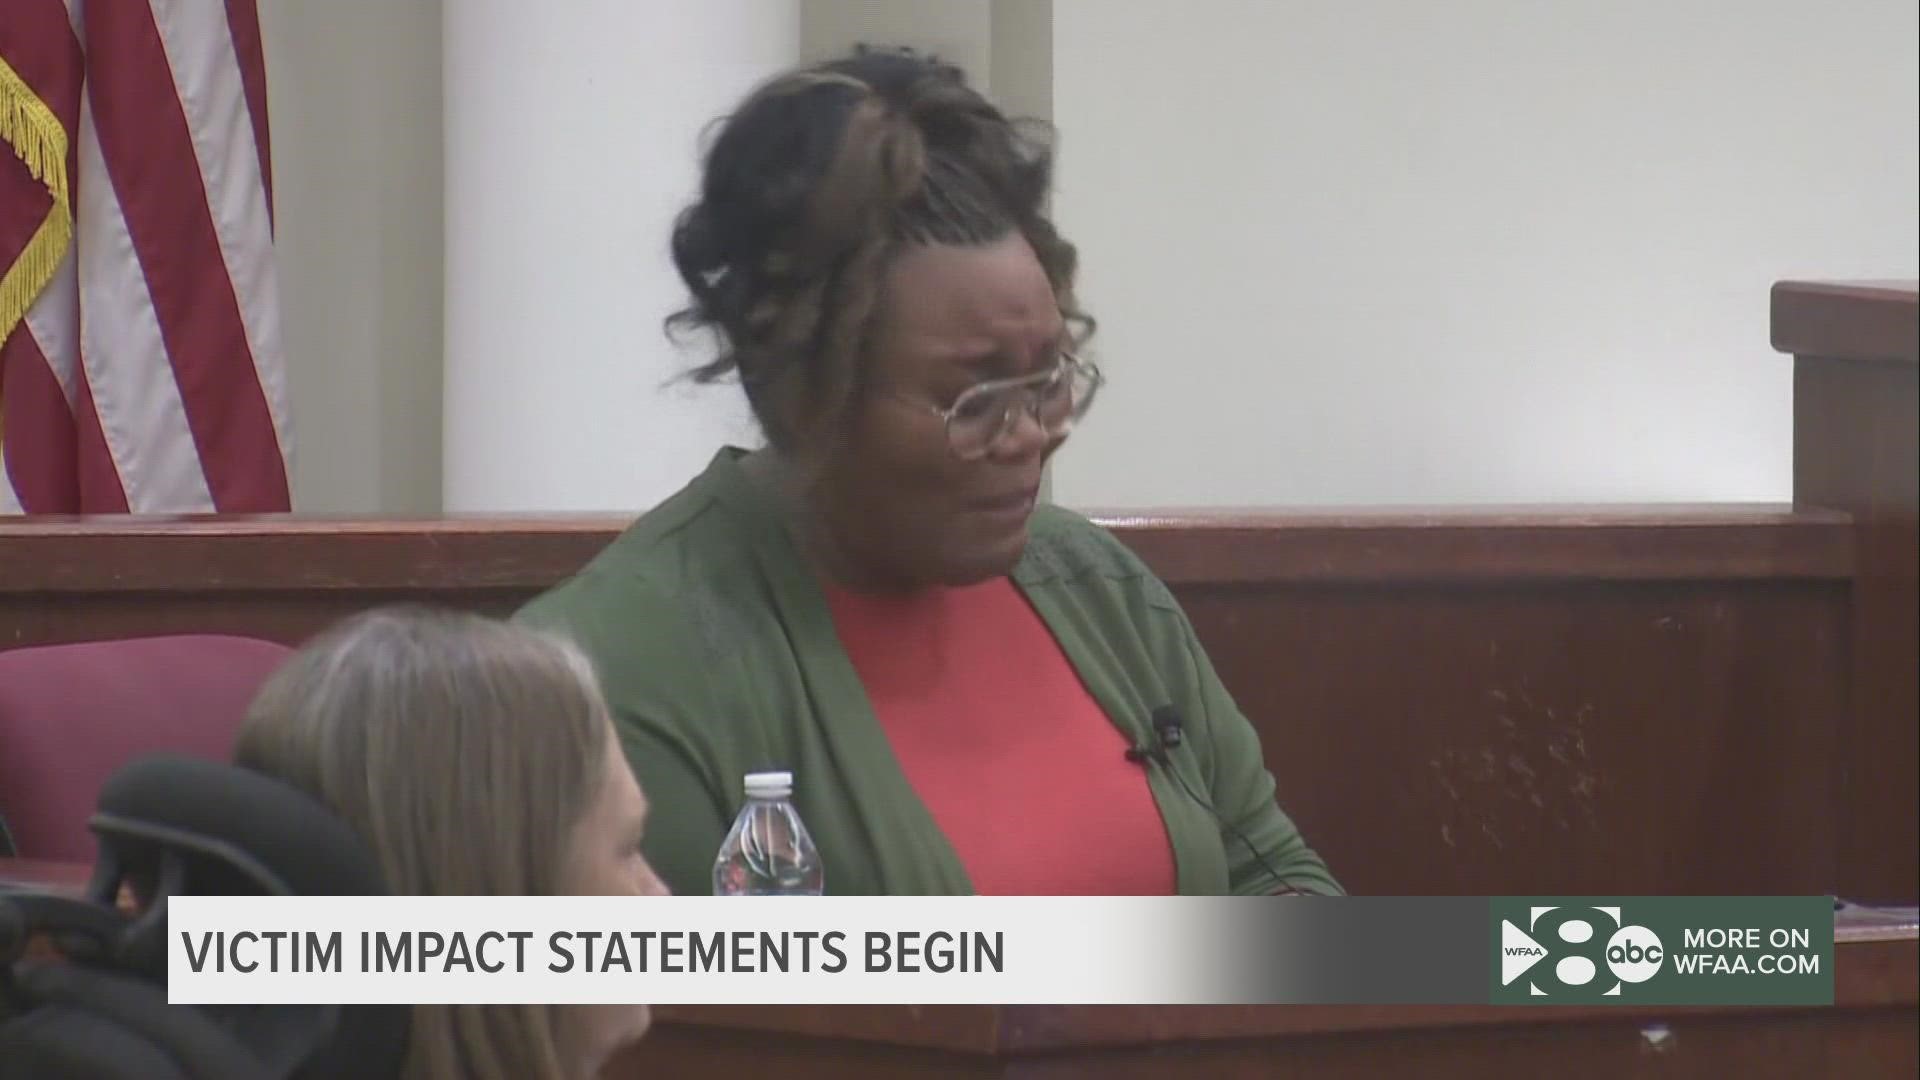 Victim impact statements were read after Aaron Dean heard his sentence for the shooting death of Atatiana Jefferson.